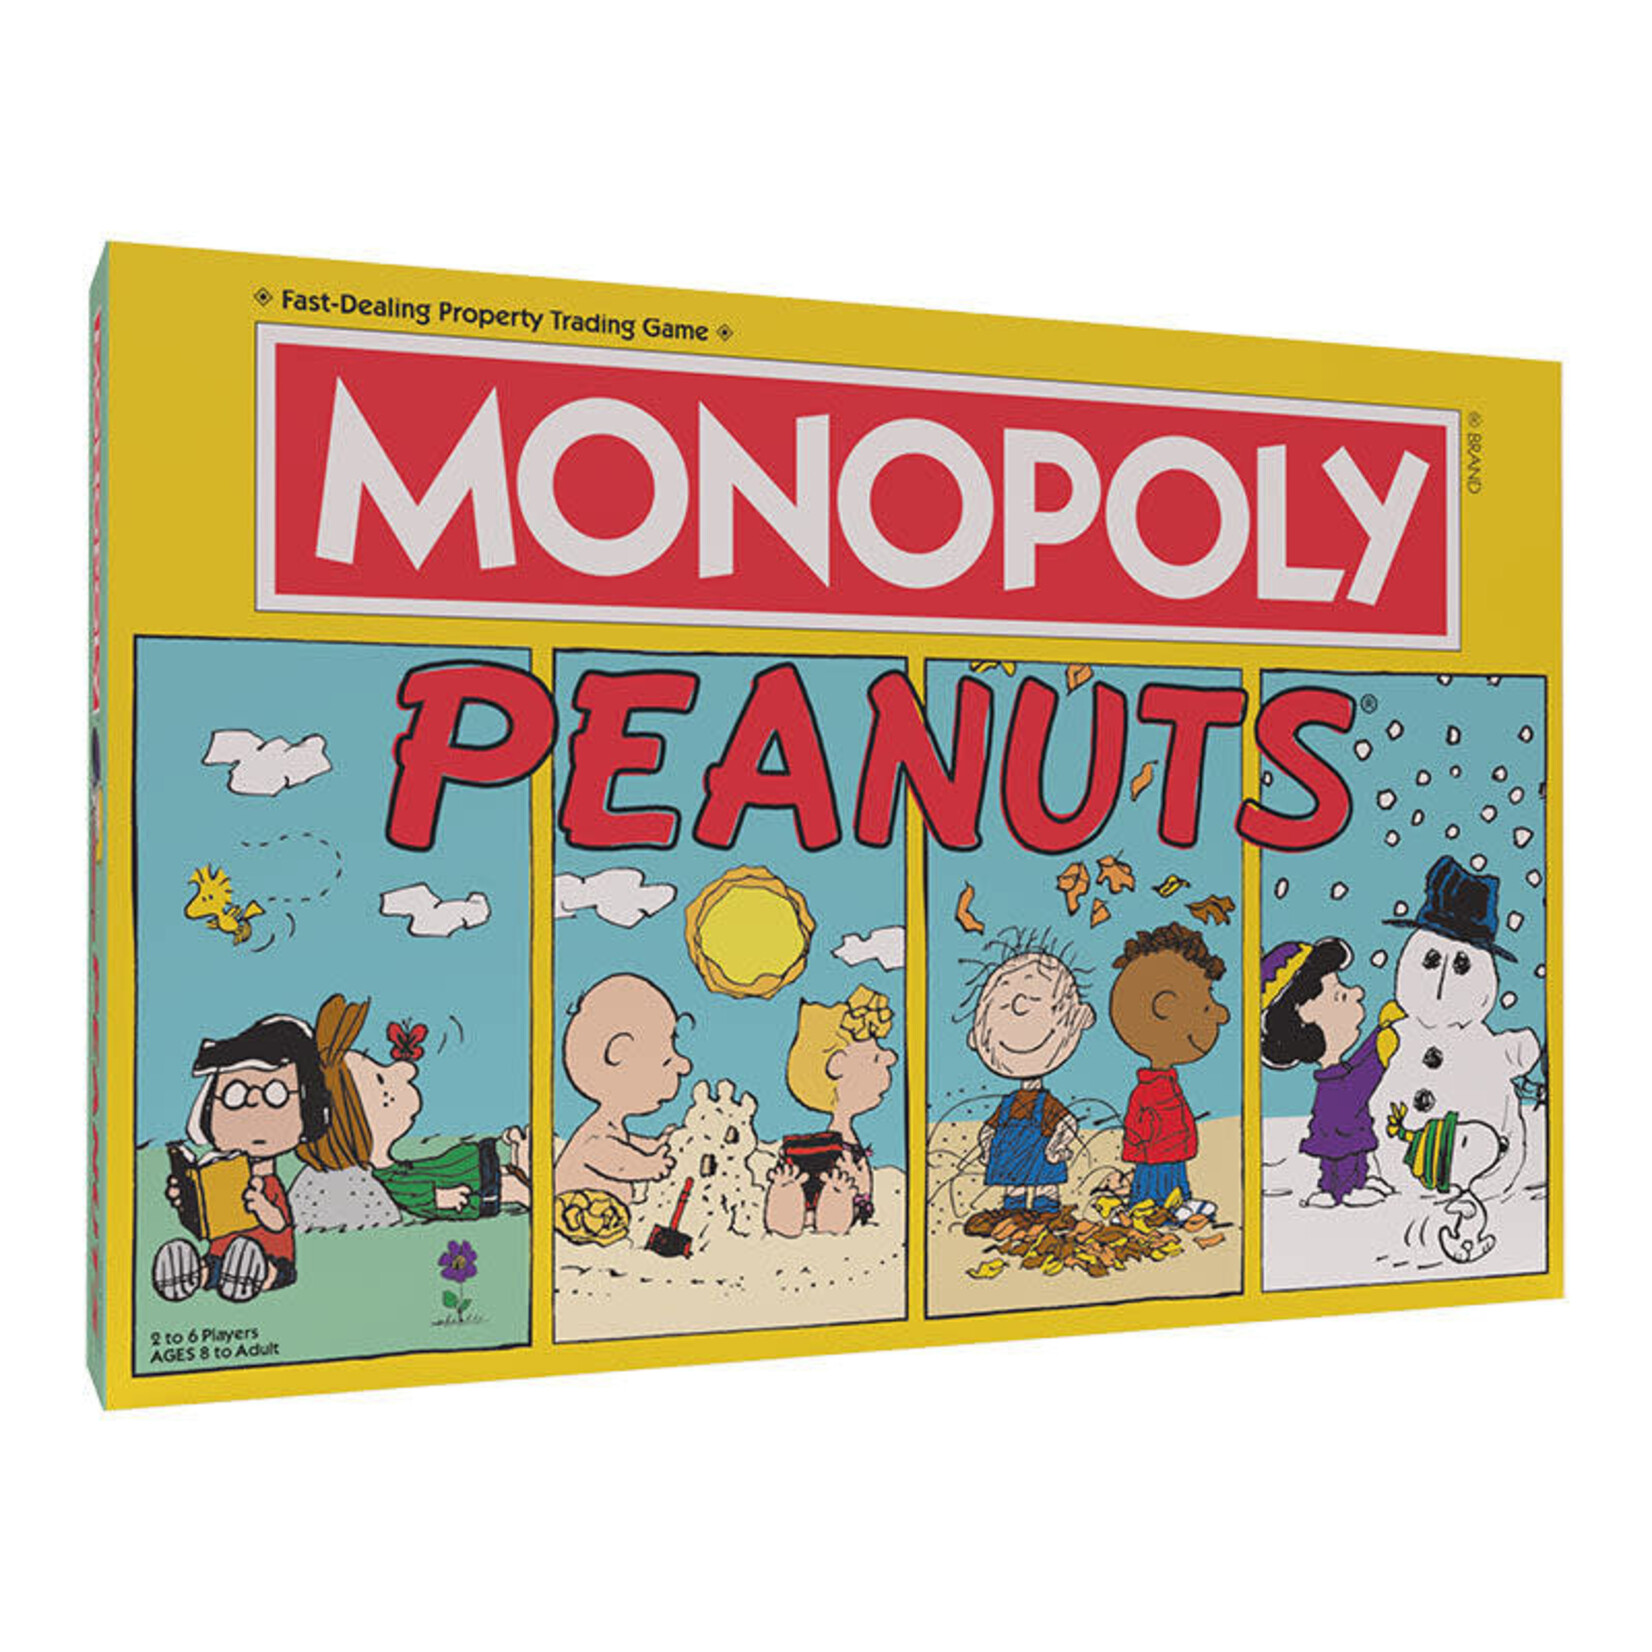 The Op Monopoly: Peanuts